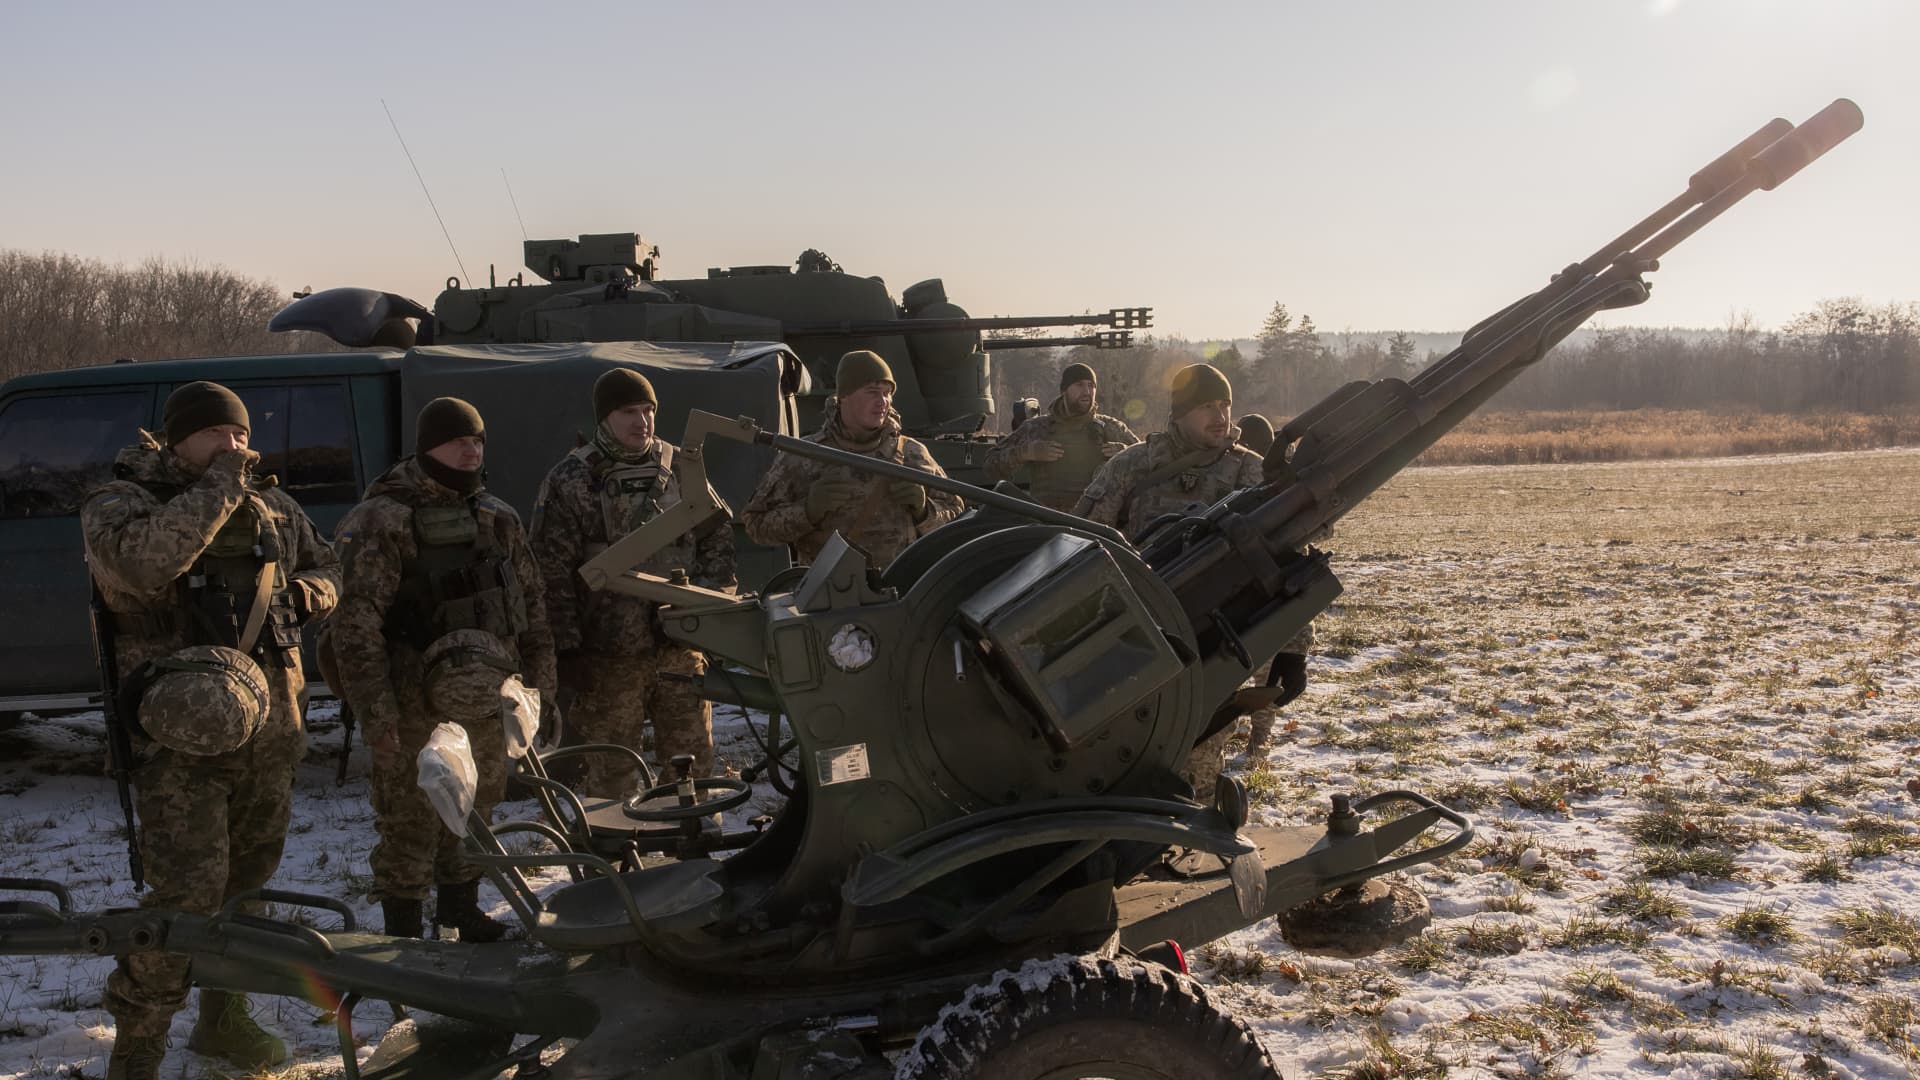 Ukrainian servicemen of a drone hunting team stand next to an anti-aircraft twin-barreled autocannon that they use to target Russian launched drones, in the outskirts of Kyiv, on November 30, 2023, amid the Russian invasion of Ukraine. 